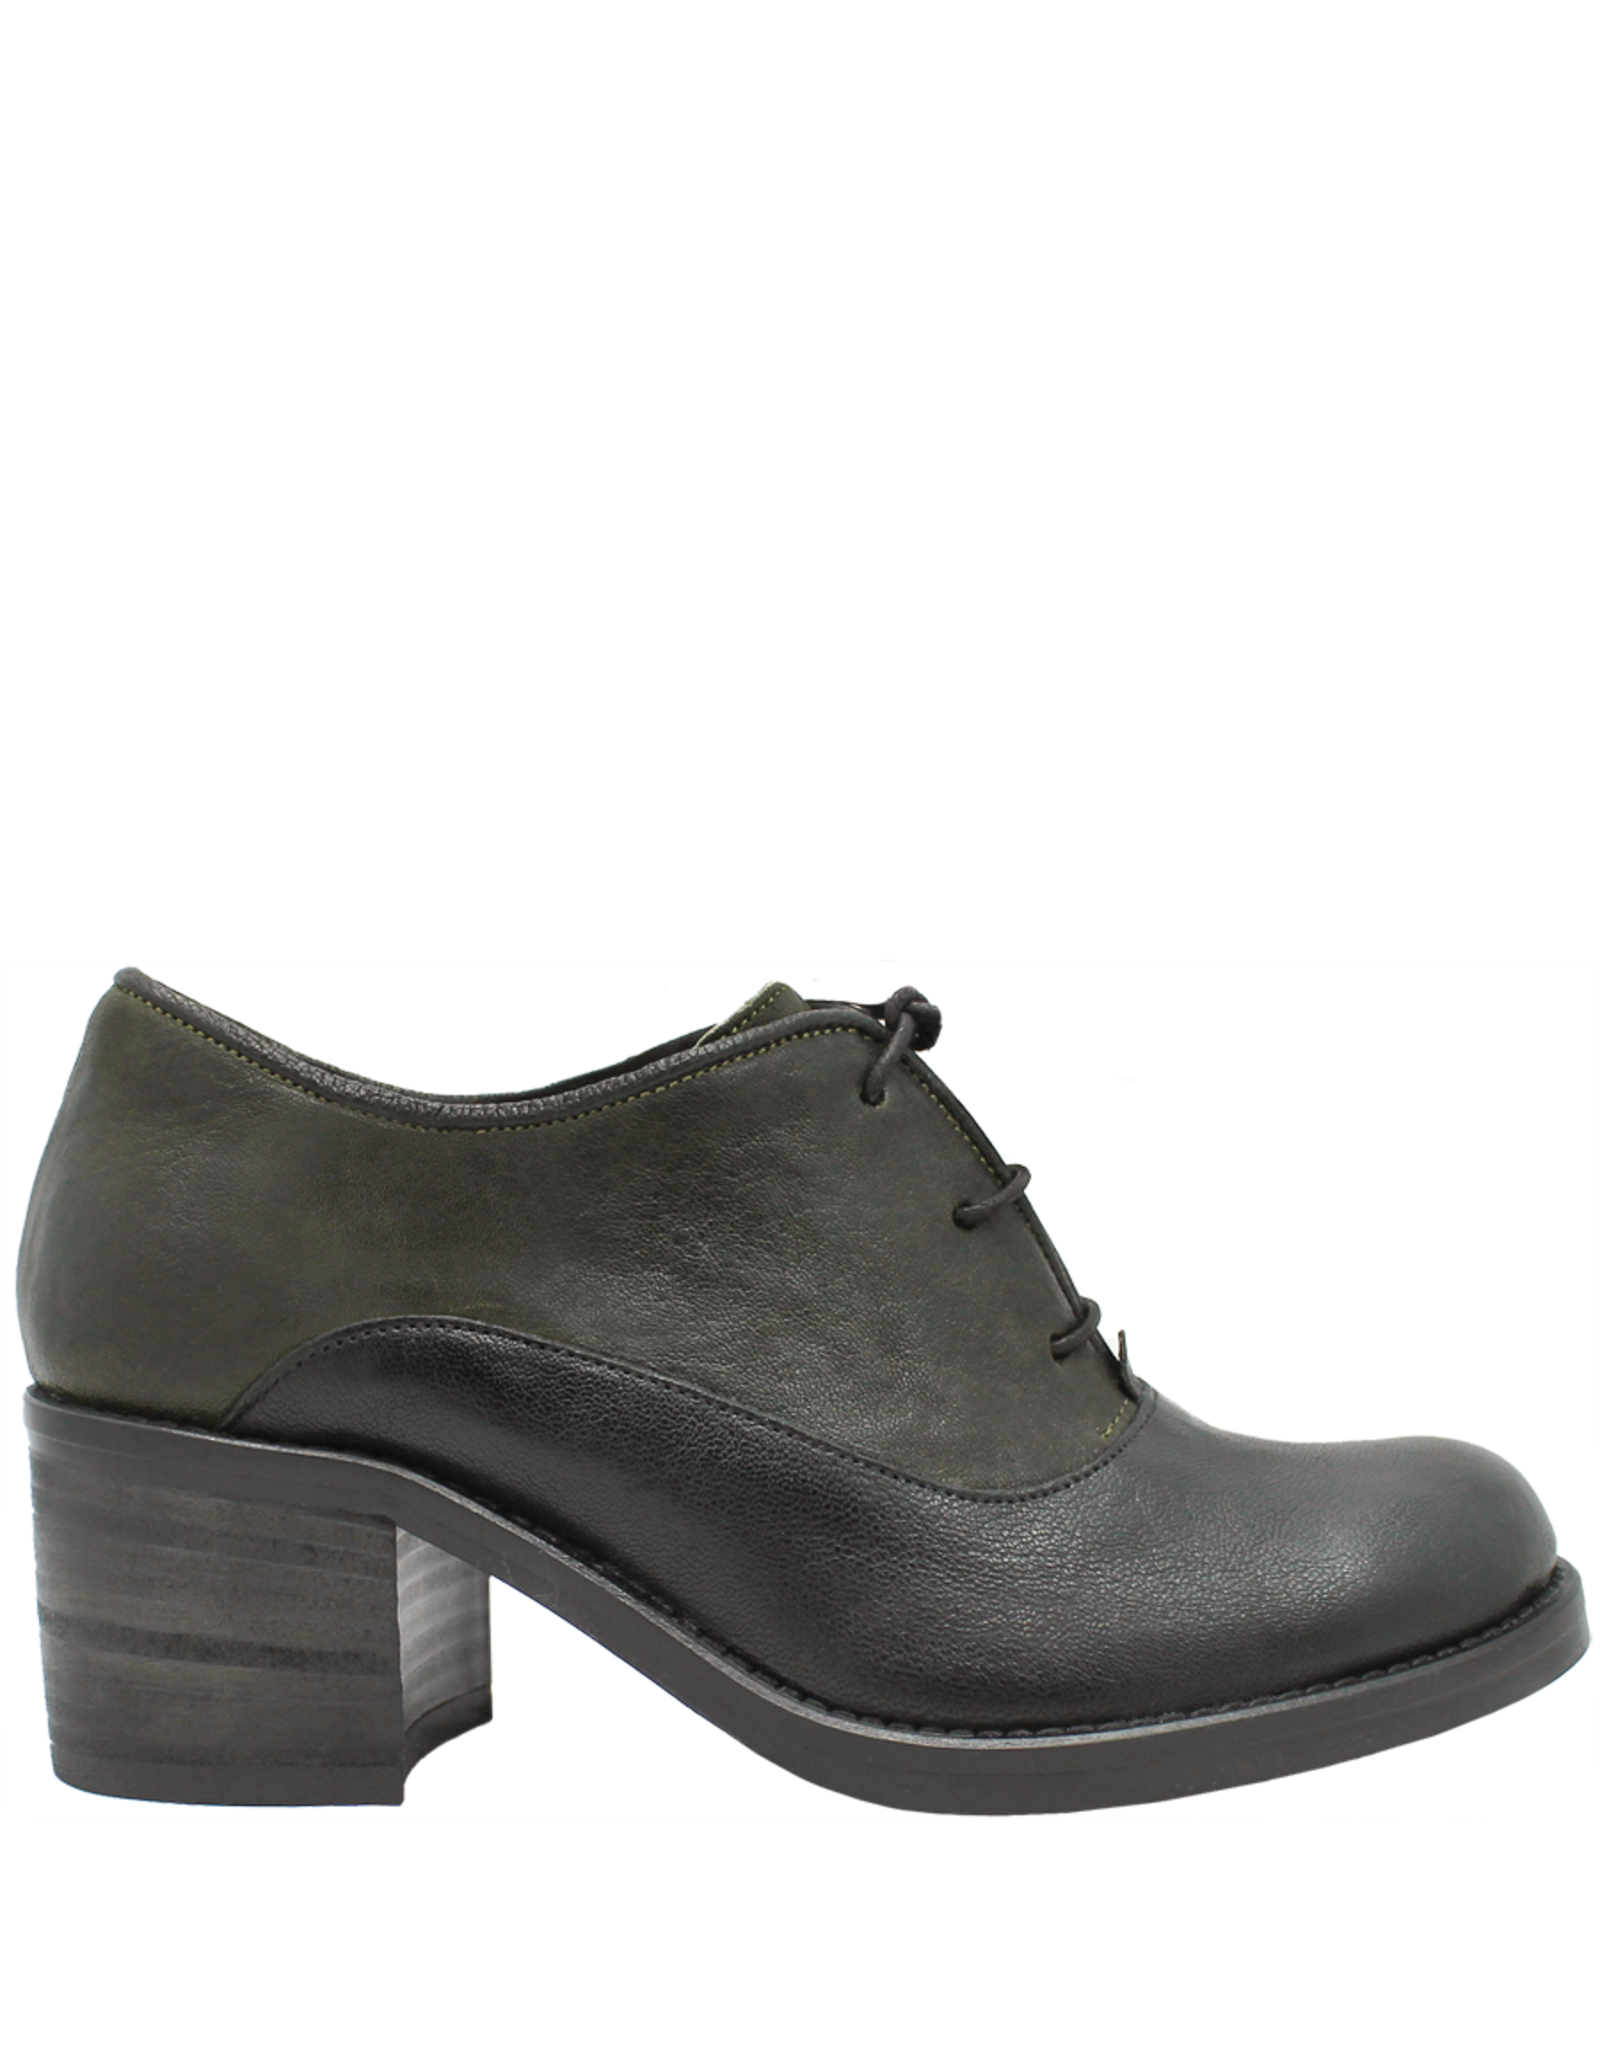 Anis Anis Forest/Black Color Block Oxford Gaia